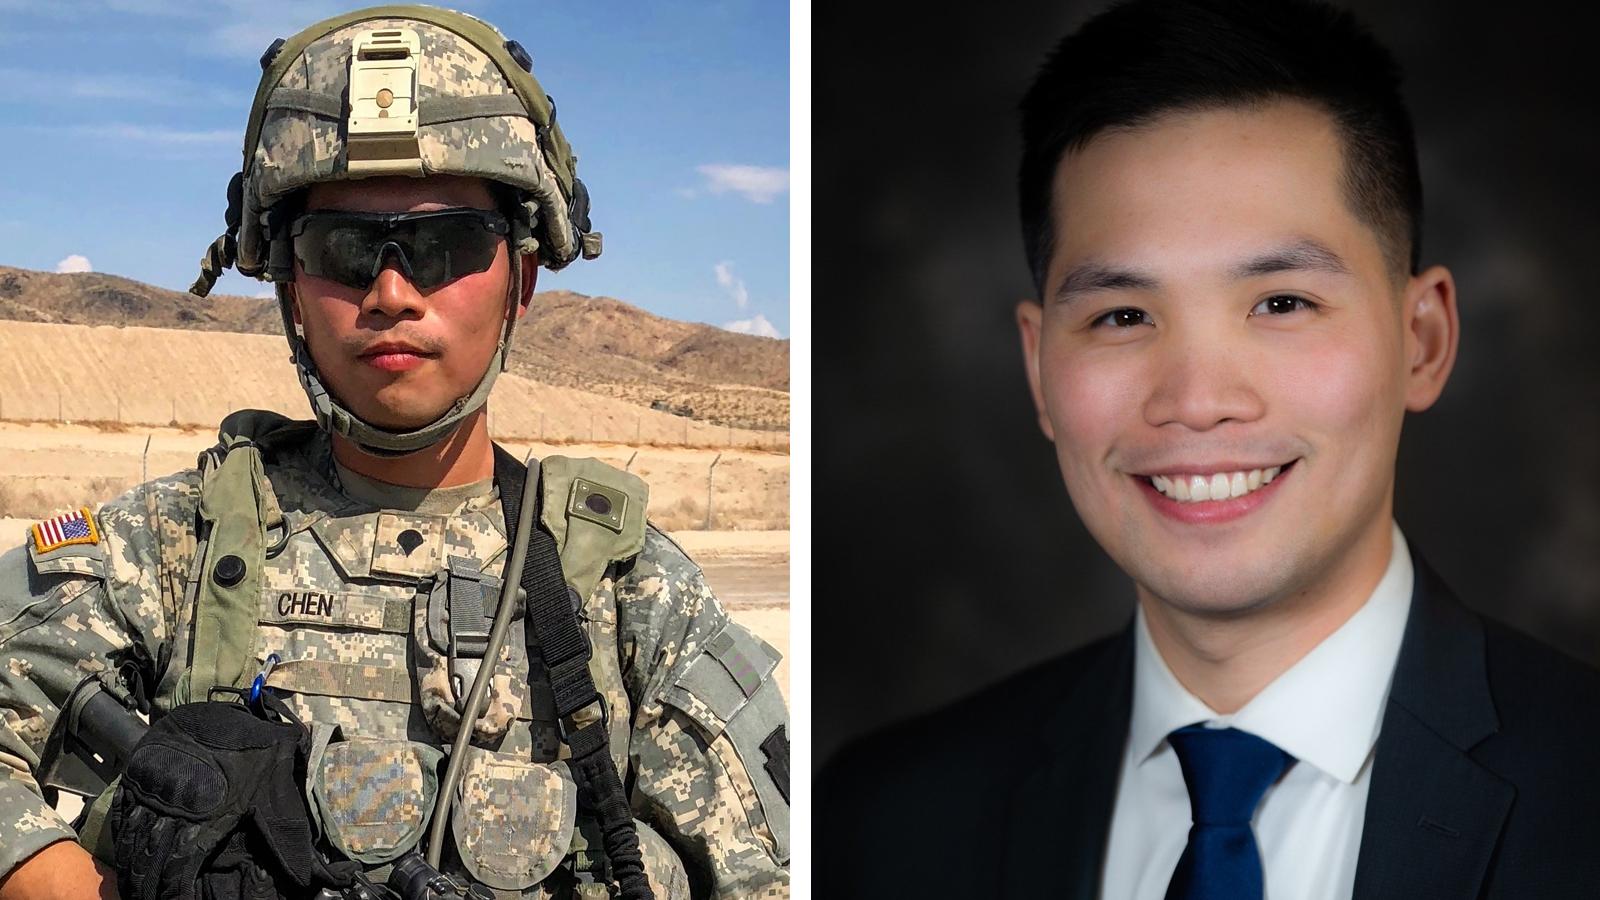 Jacky Chen in combat fatigues (left photo) and in suit and tie (right photo)